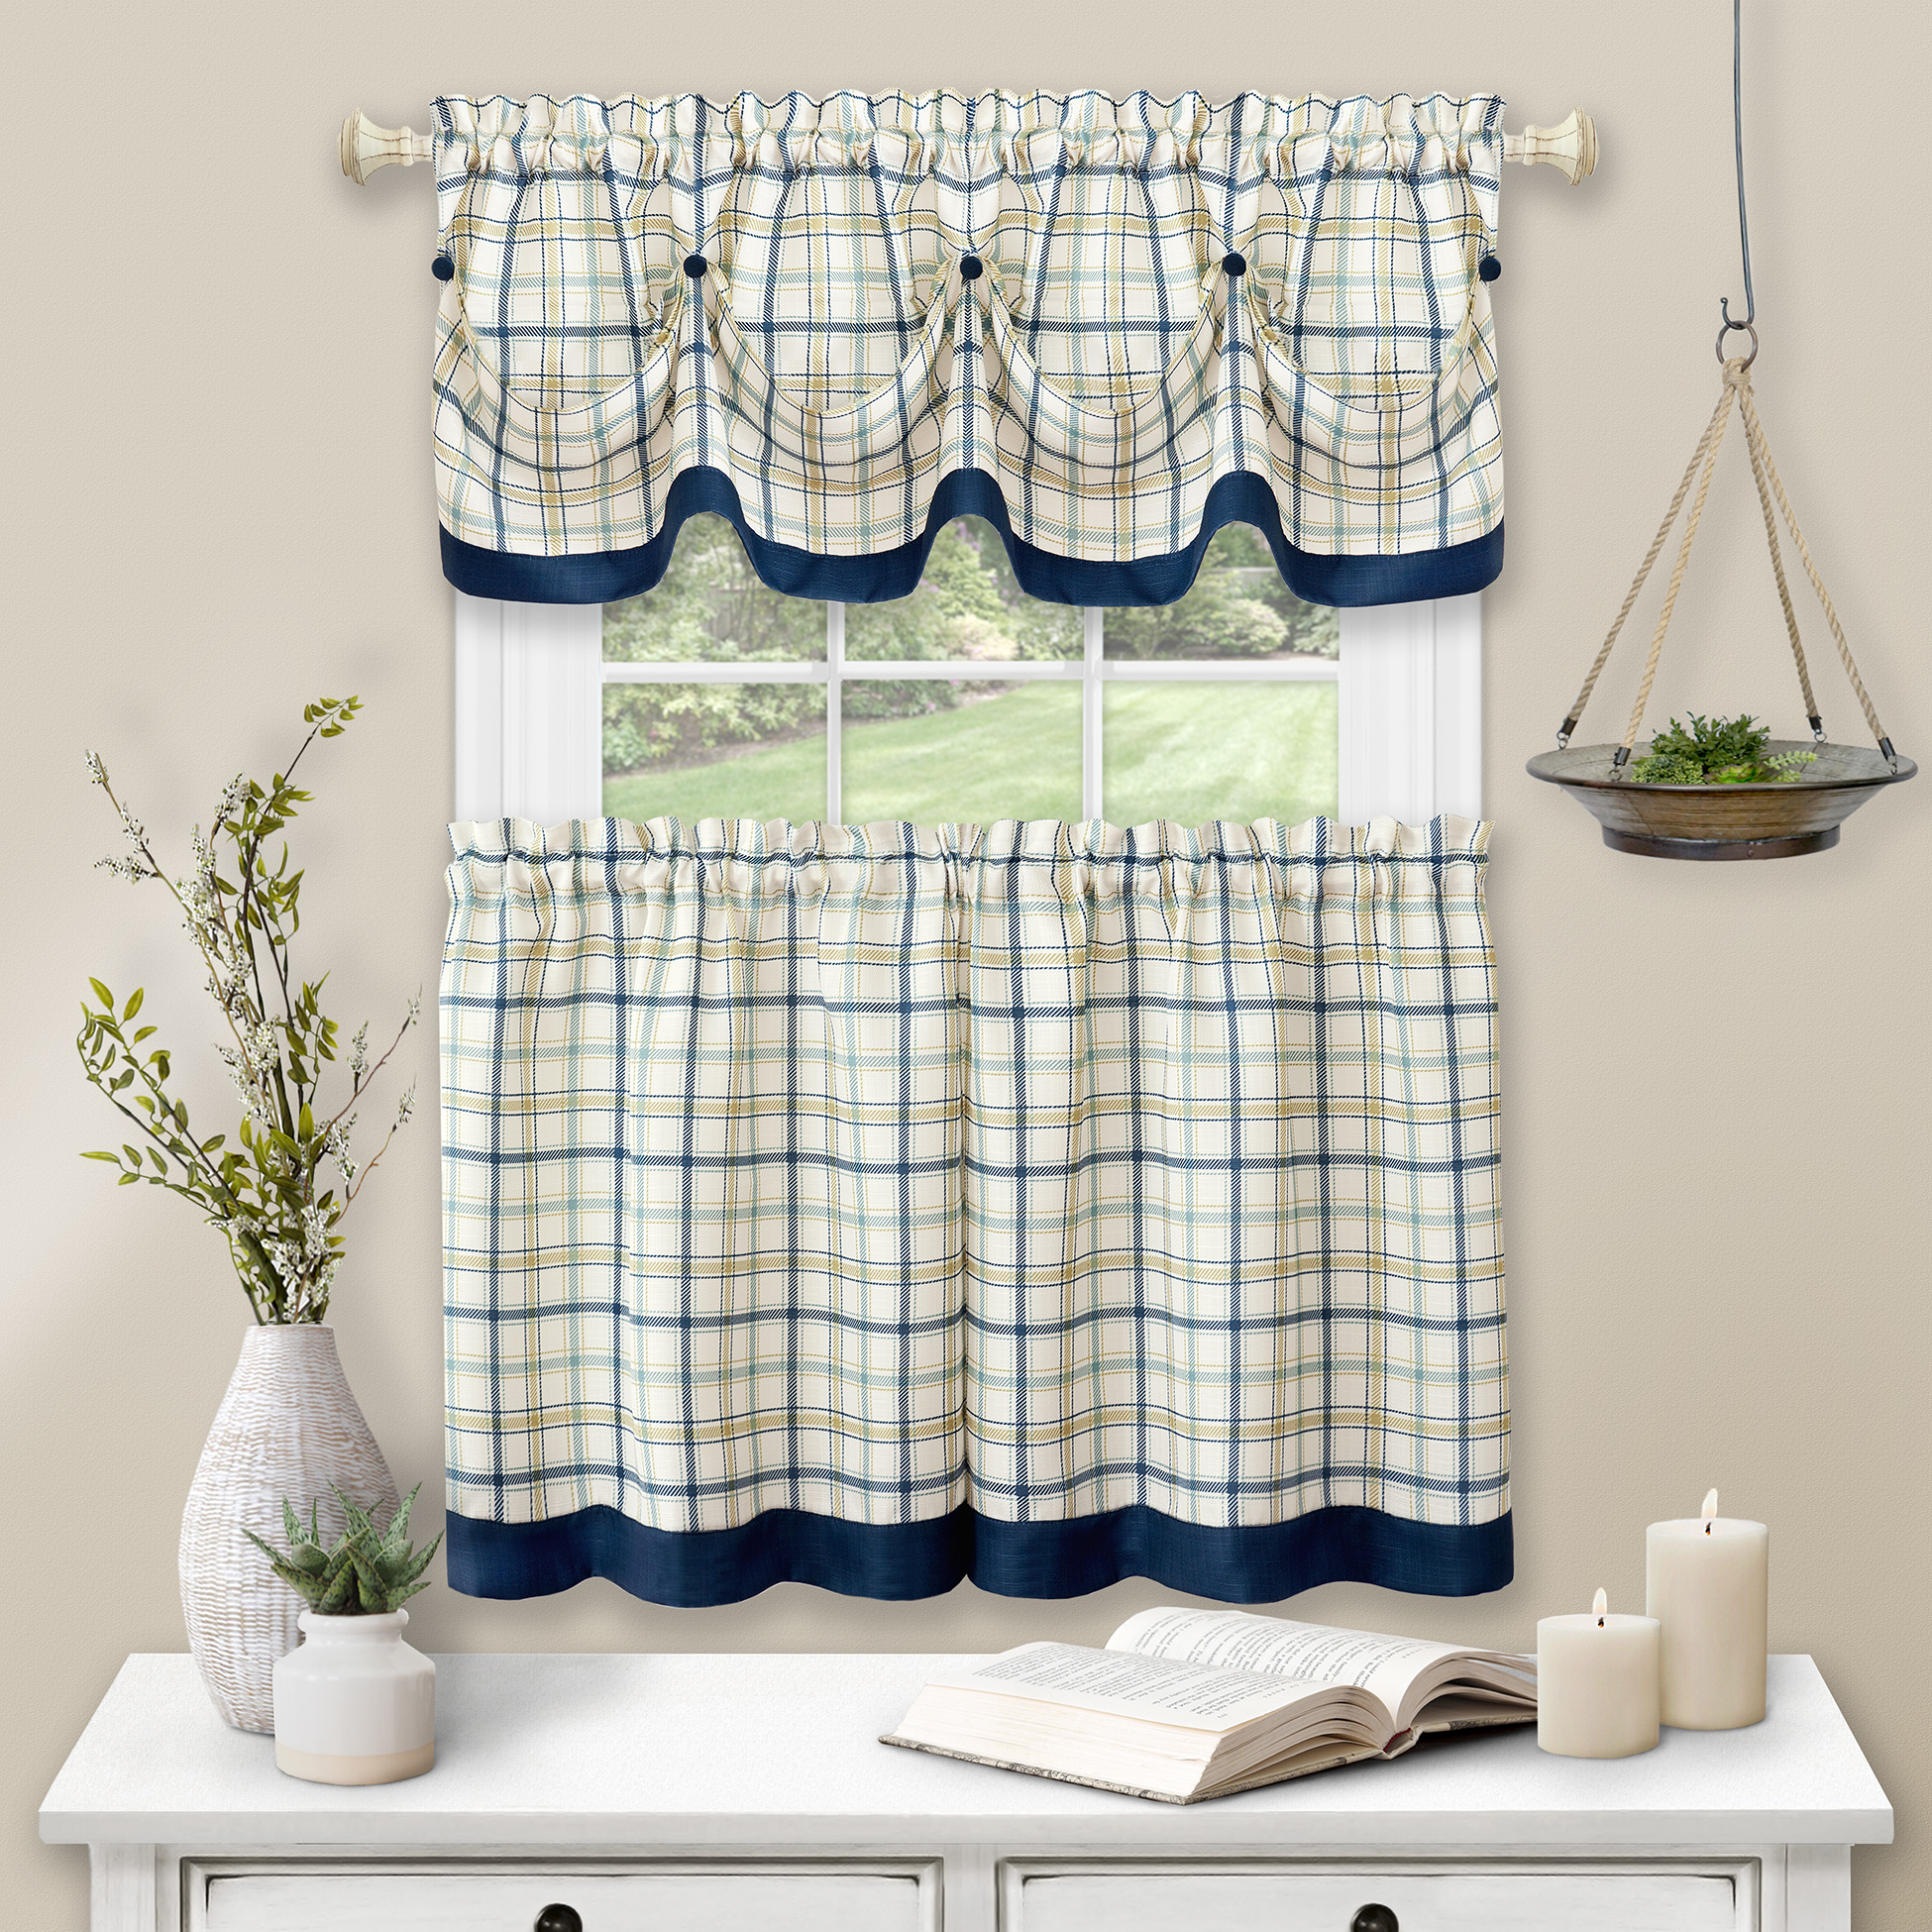 Achim Home Furnishing Navy Plaid Gingham Tab-Top 3-Piece Window Kitchen Curtains Drapes with Valance